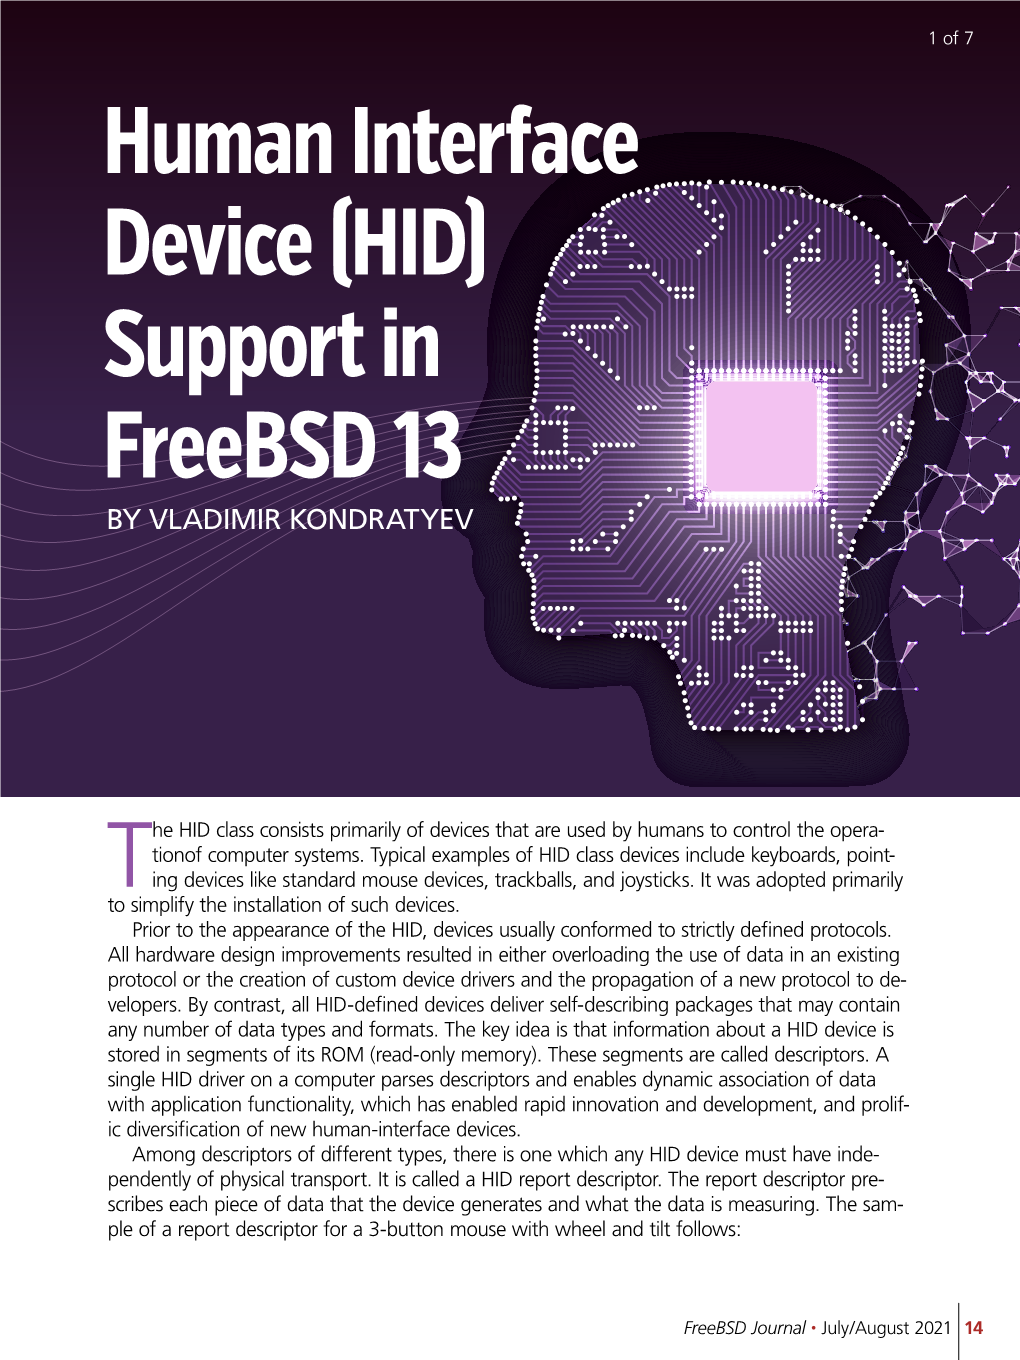 Human Interface Device [HID] Support in Freebsd 13